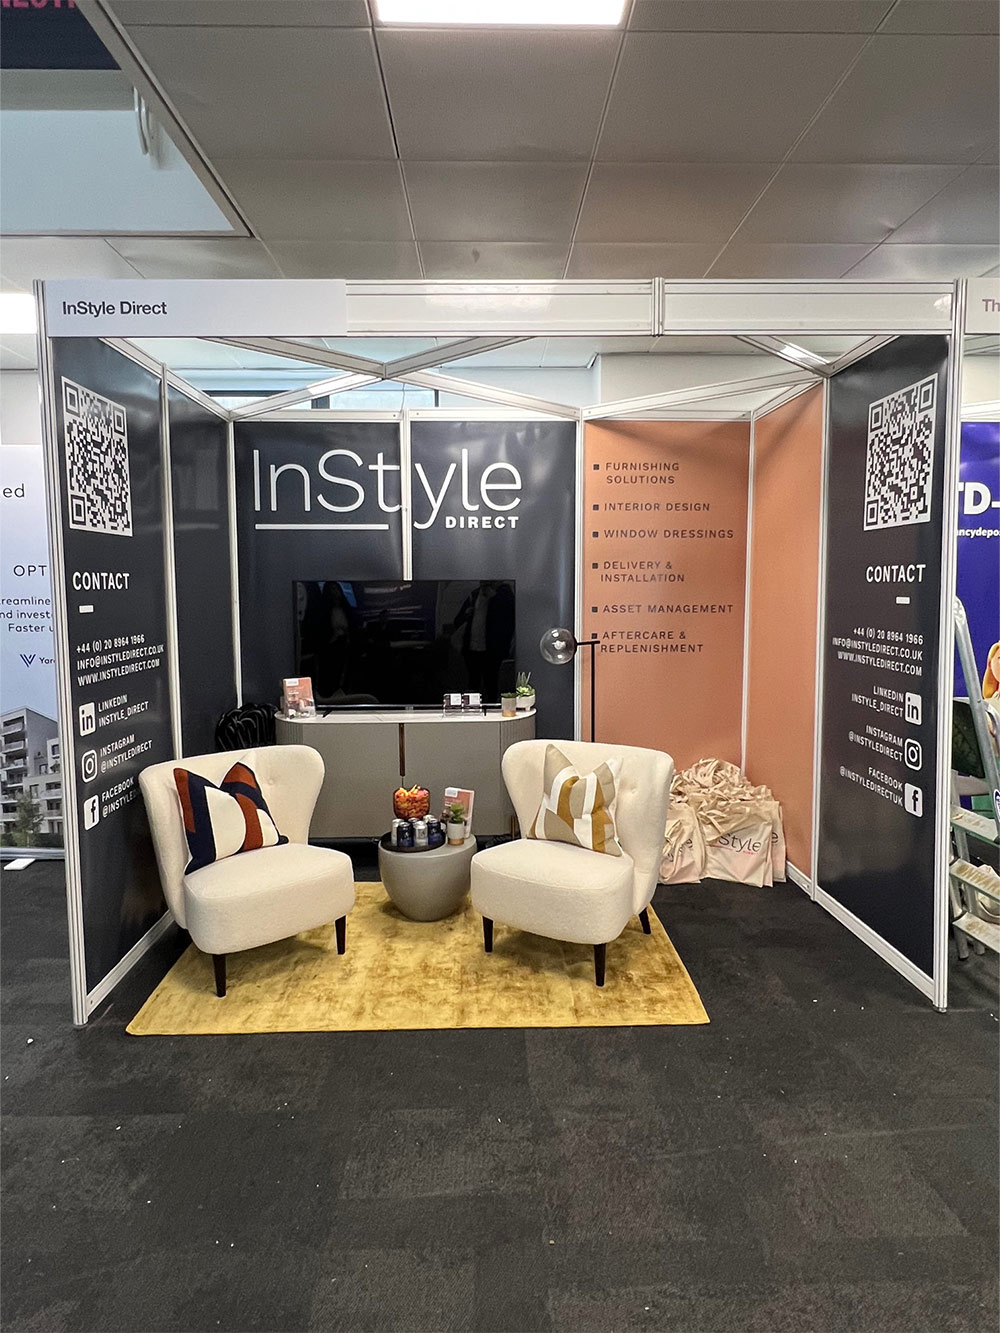 UKAA Build To Rent Expo Partnered with InStyle Direct